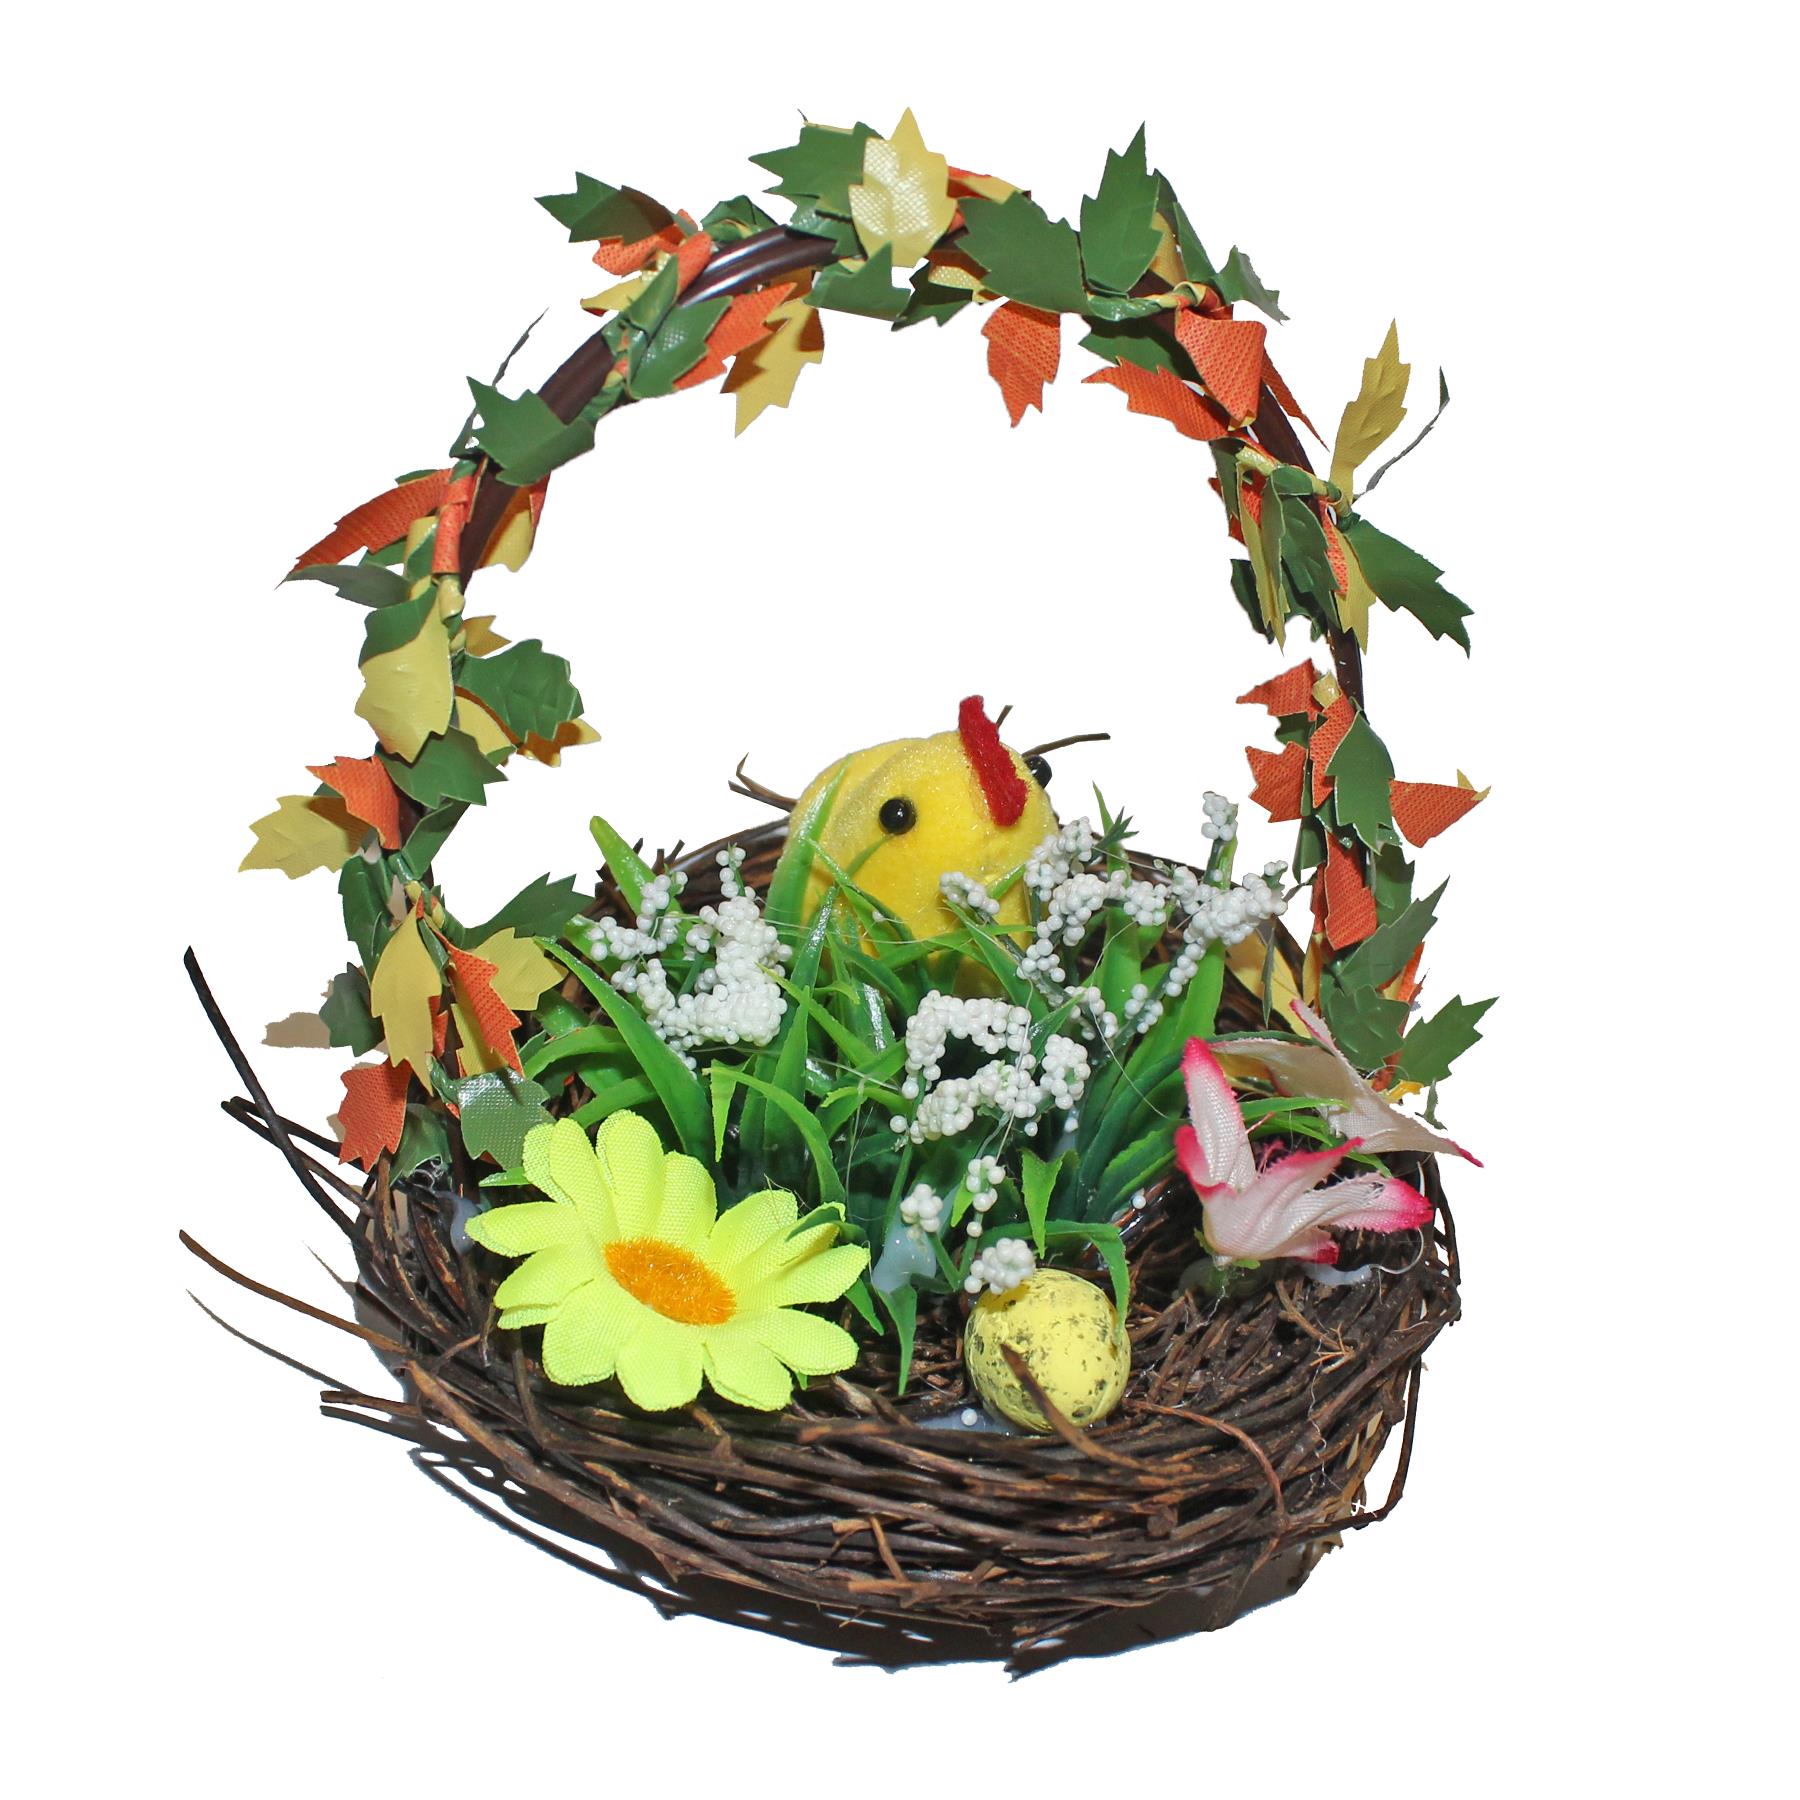 Easter Decorations, Bonnet Making, Arts and Crafts - Nest Basket with Chick